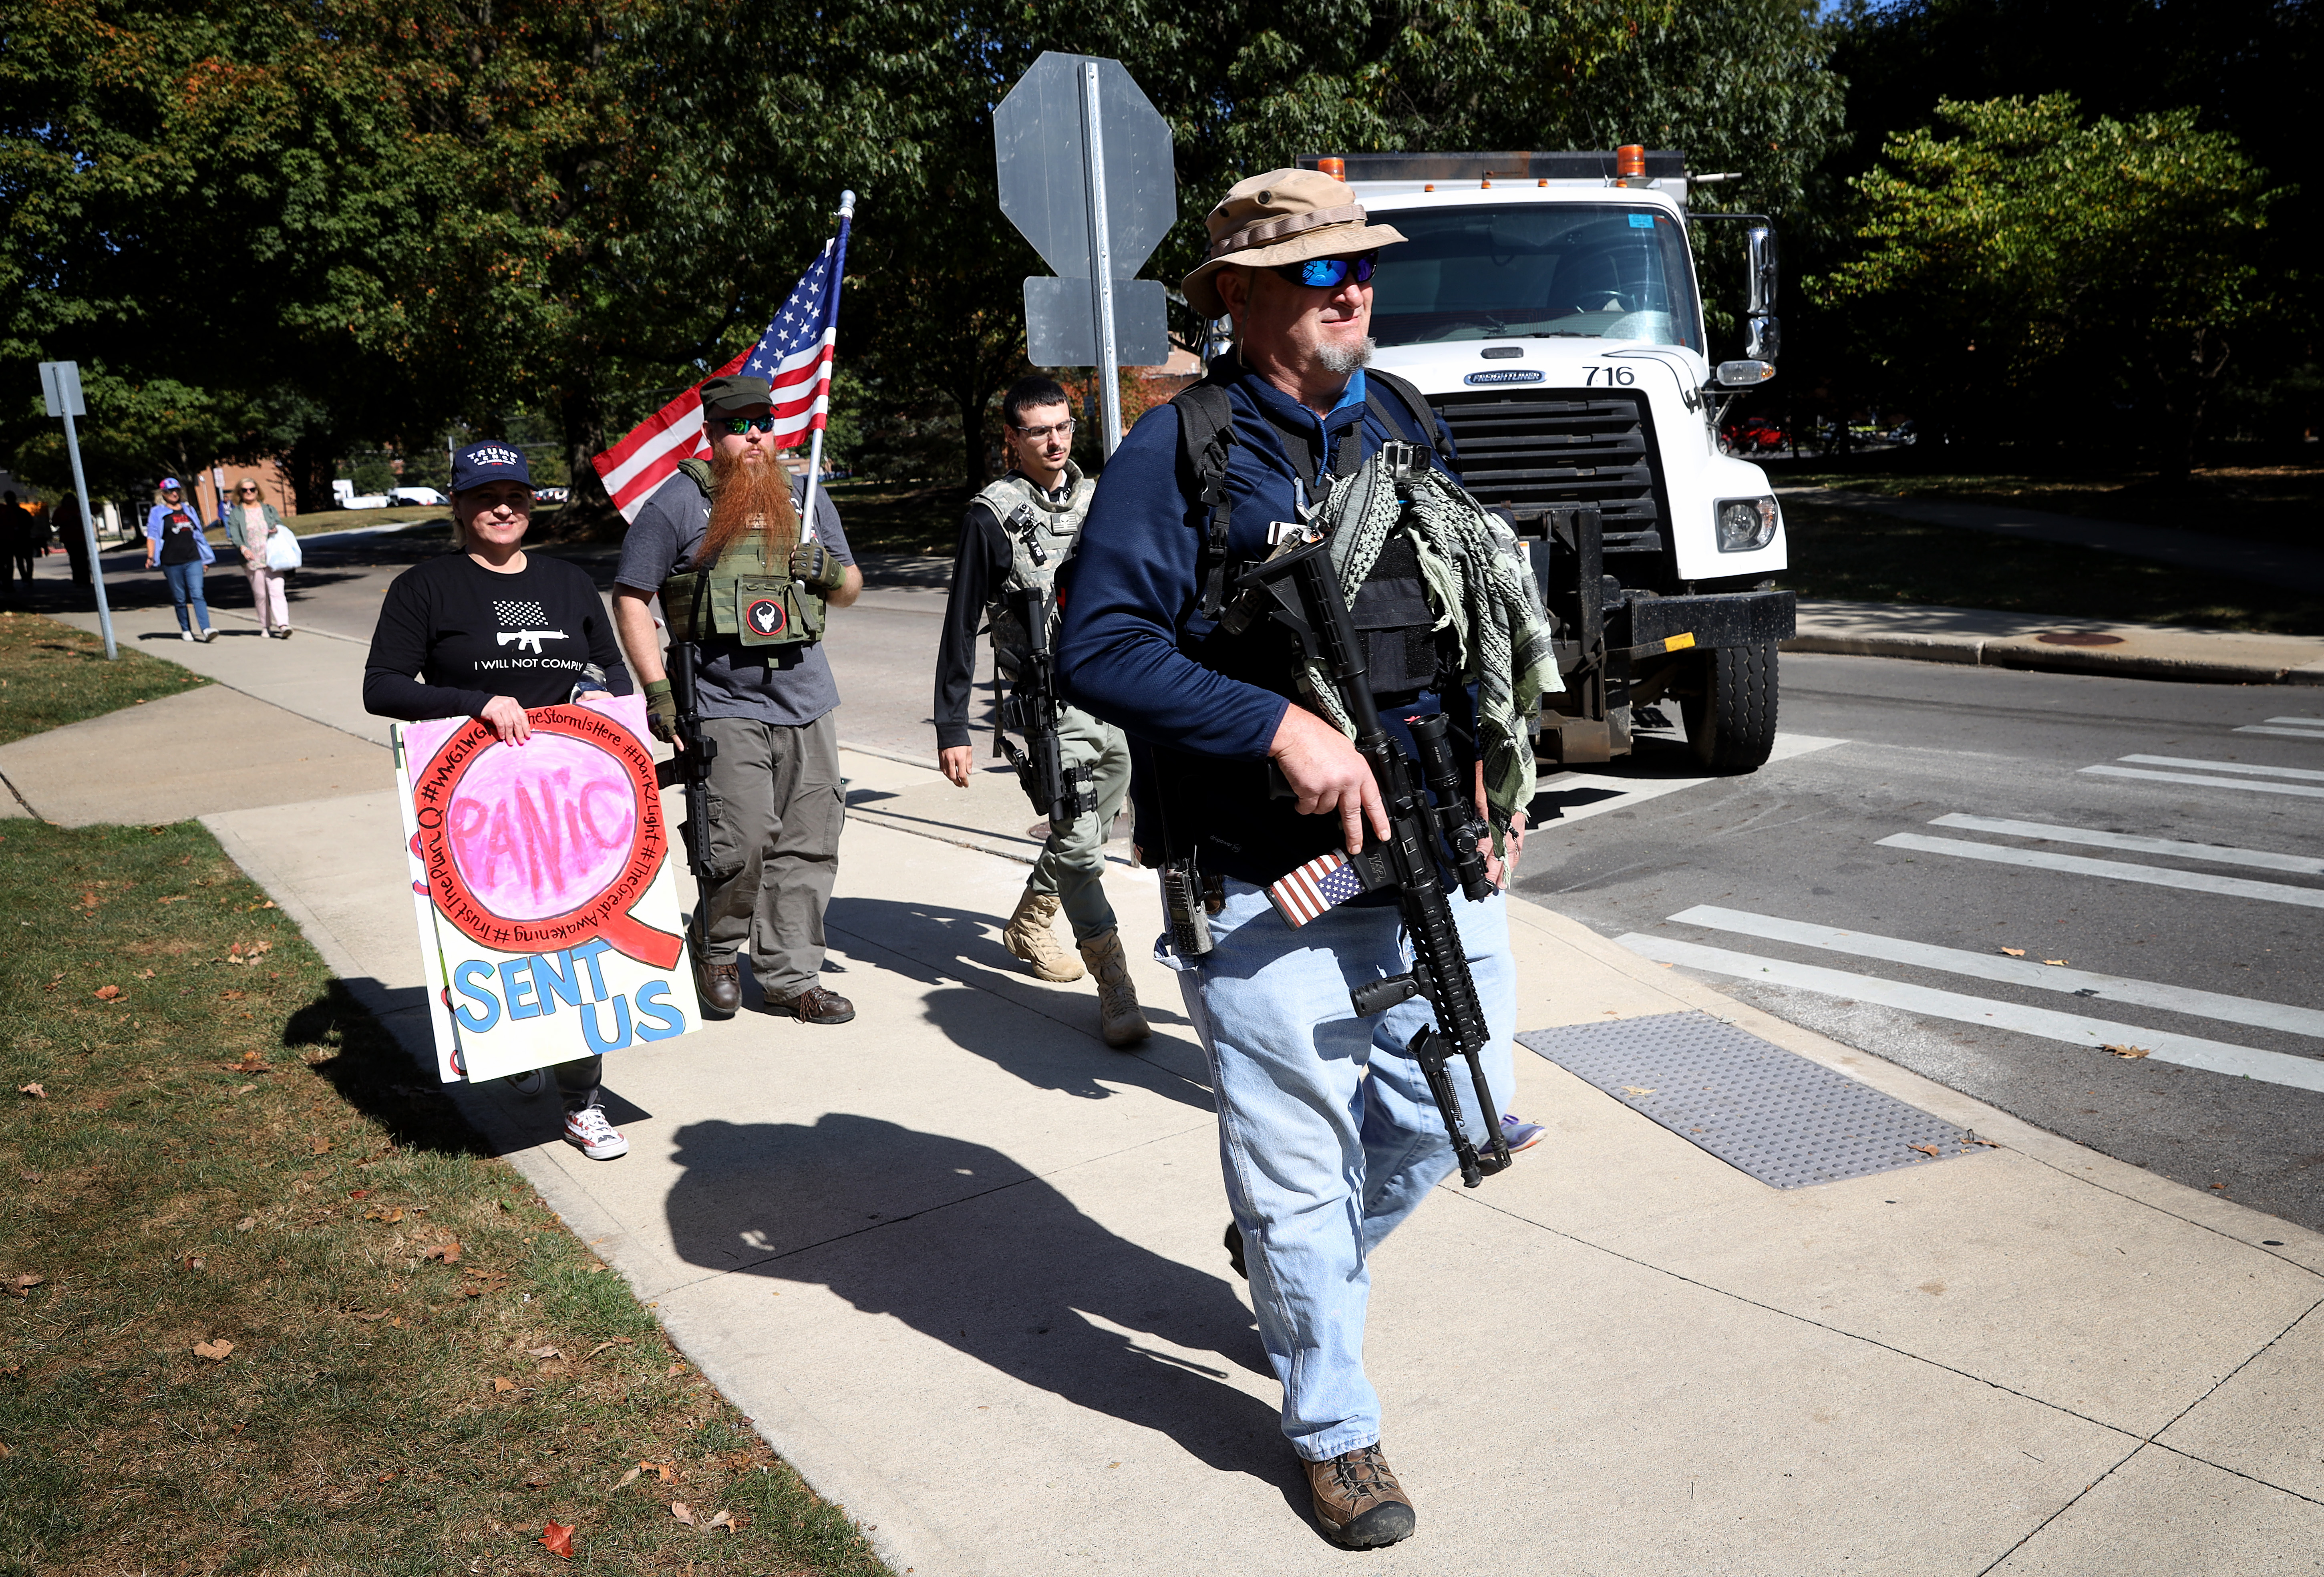 Gun rights supporters demonstrate on the campus of Otterbein University on Oct. 15, 2019 in Westerville, Ohio. 